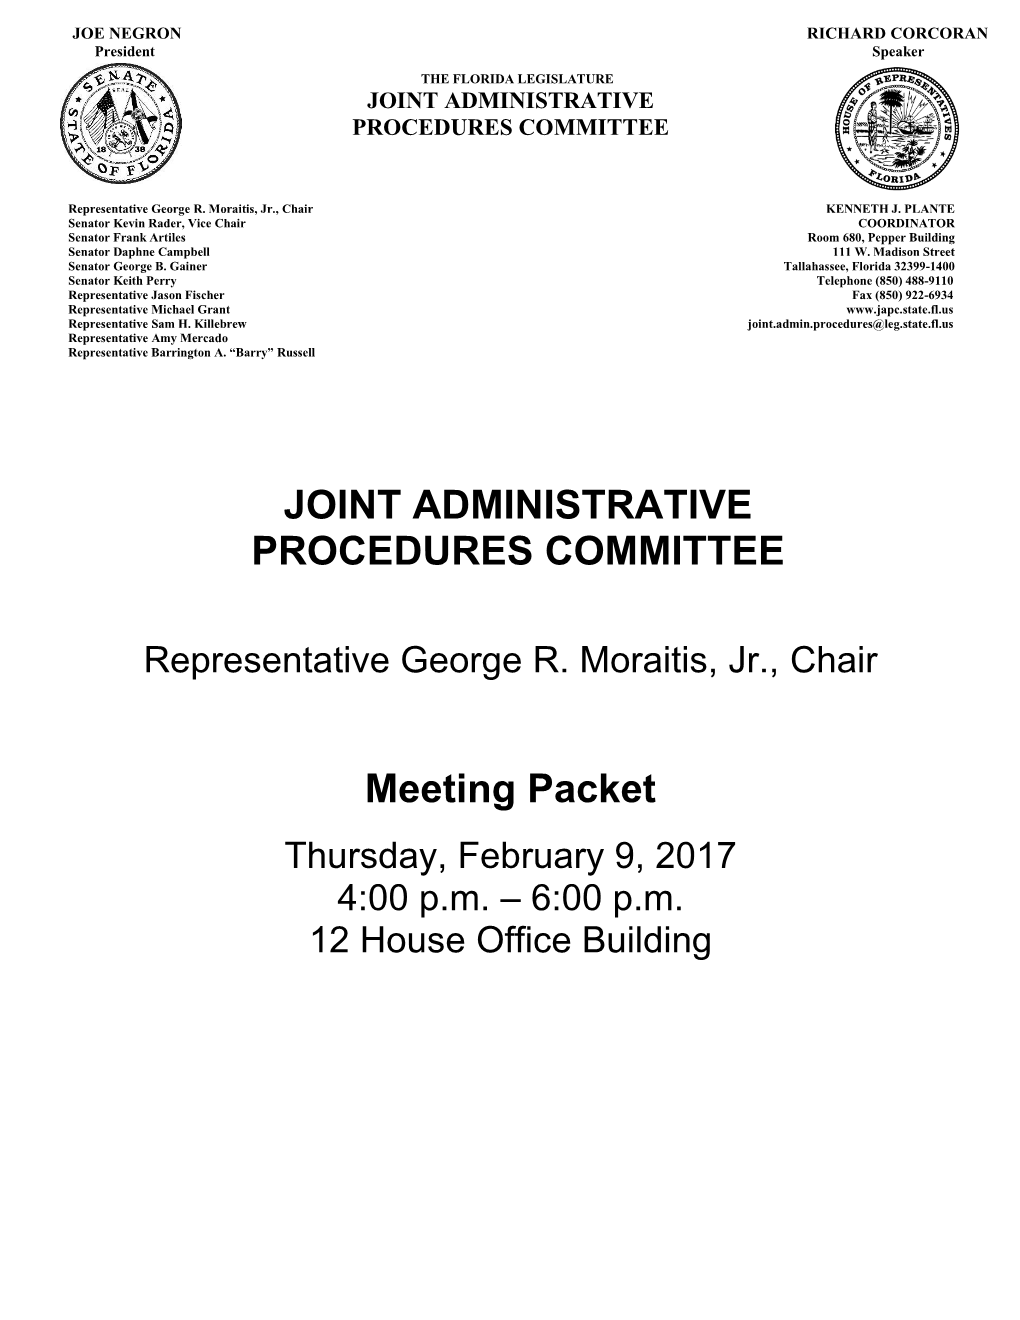 Joint Administrative Procedures Committee